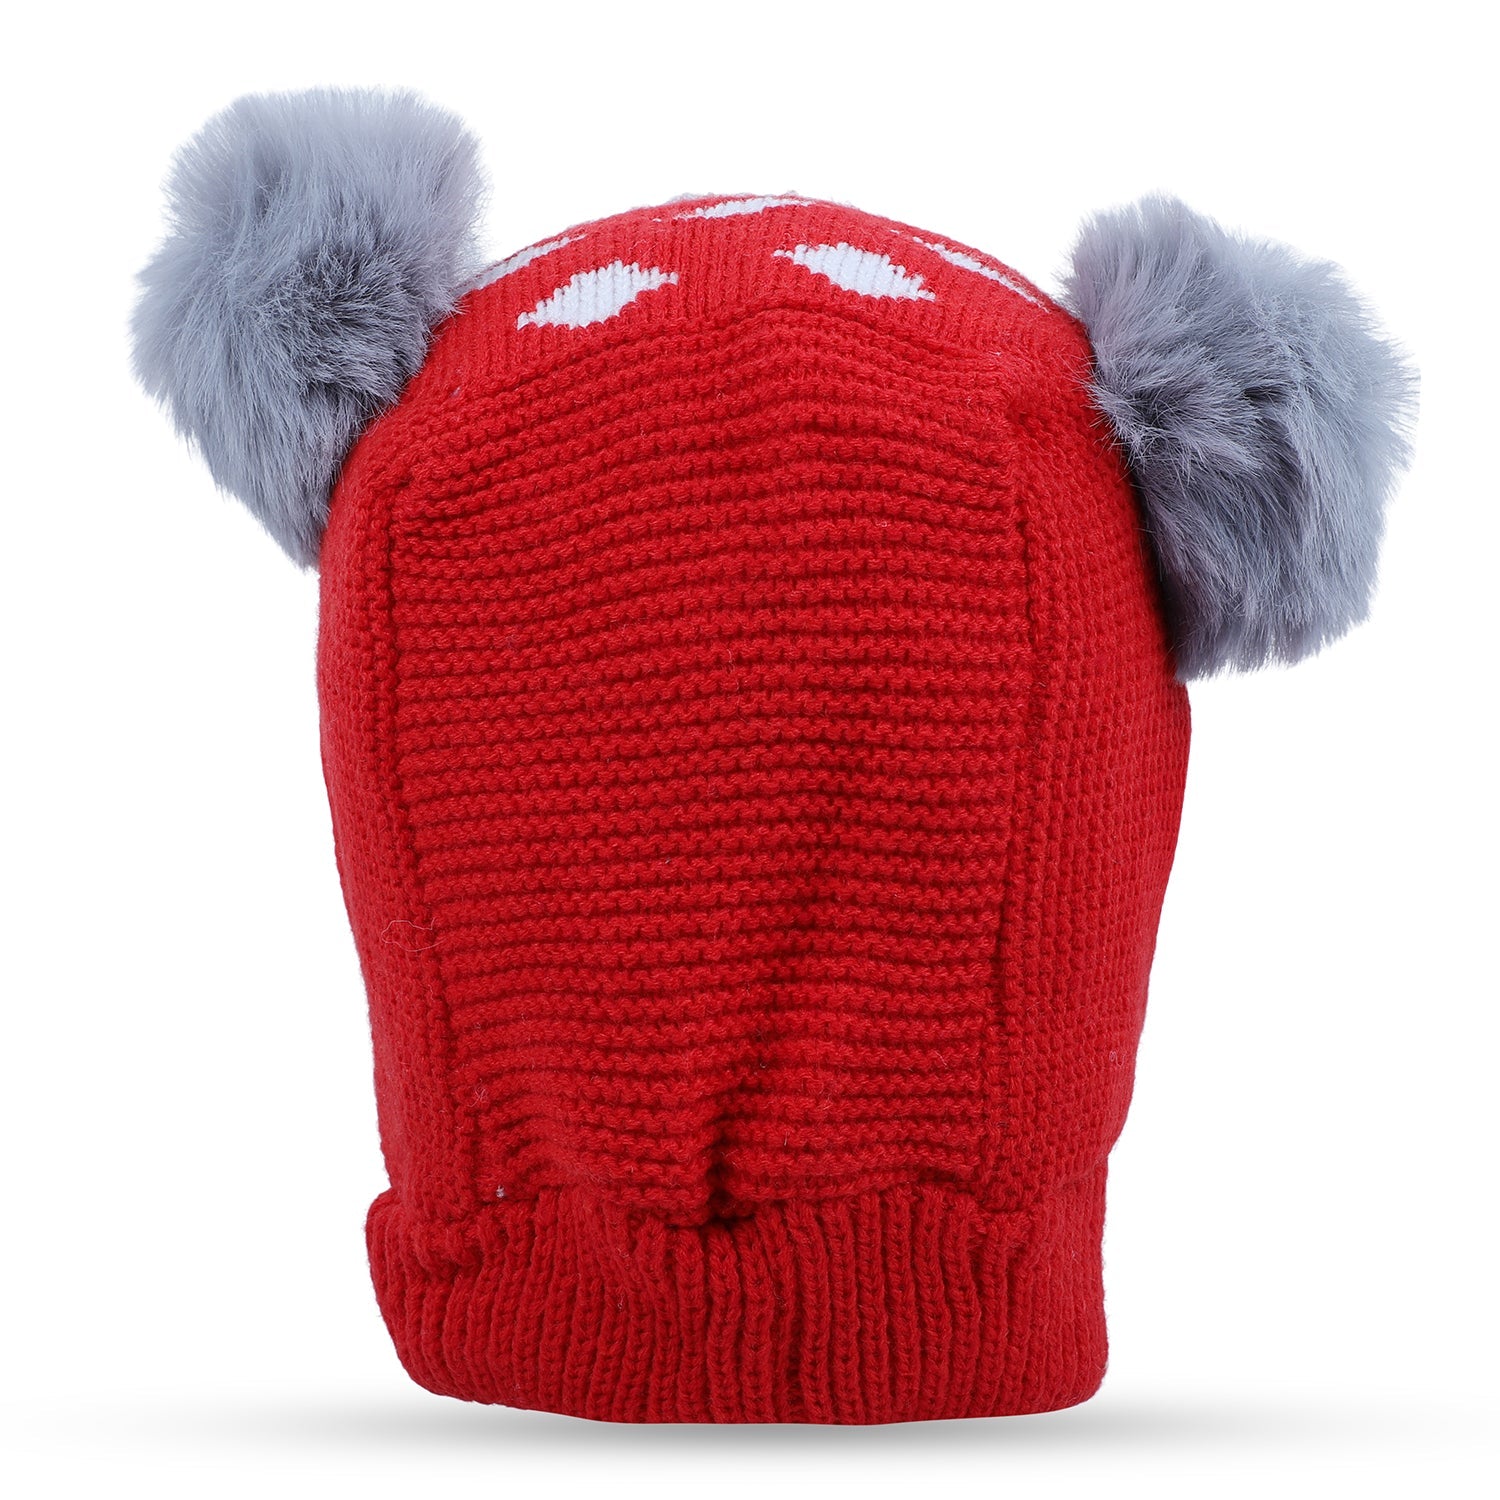 Baby Moo Adorable Pom Pom Knitted Beanie Woollen Cap - Red - Baby Moo